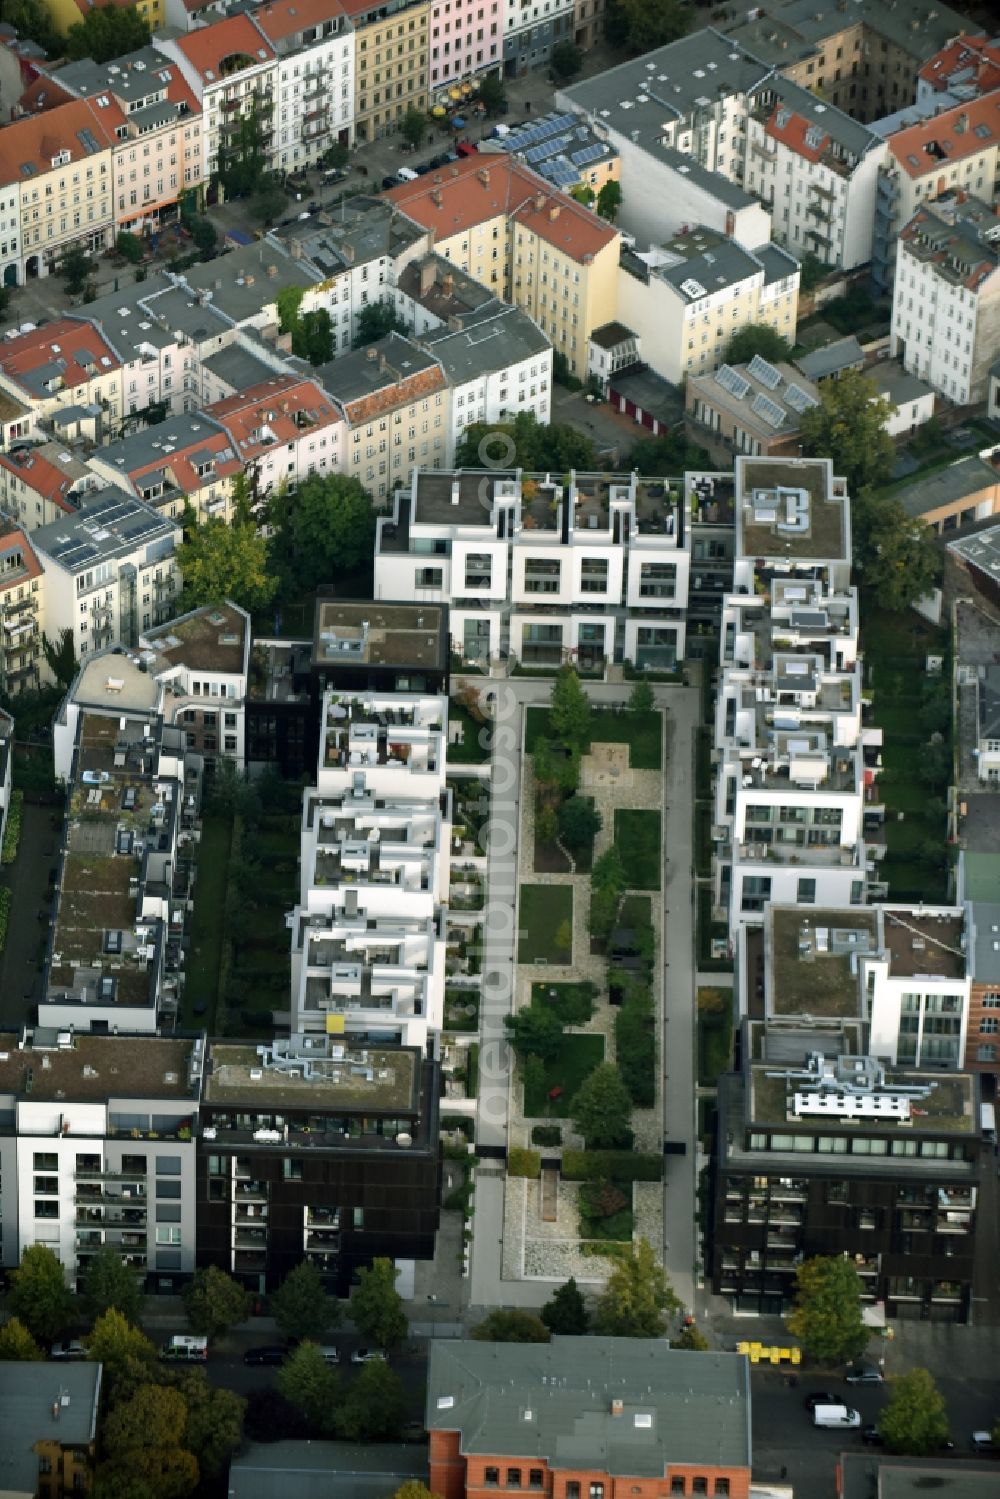 Berlin from the bird's eye view: View of the residential development area Marthashof at the Berlin - district Prenzlauer Berg